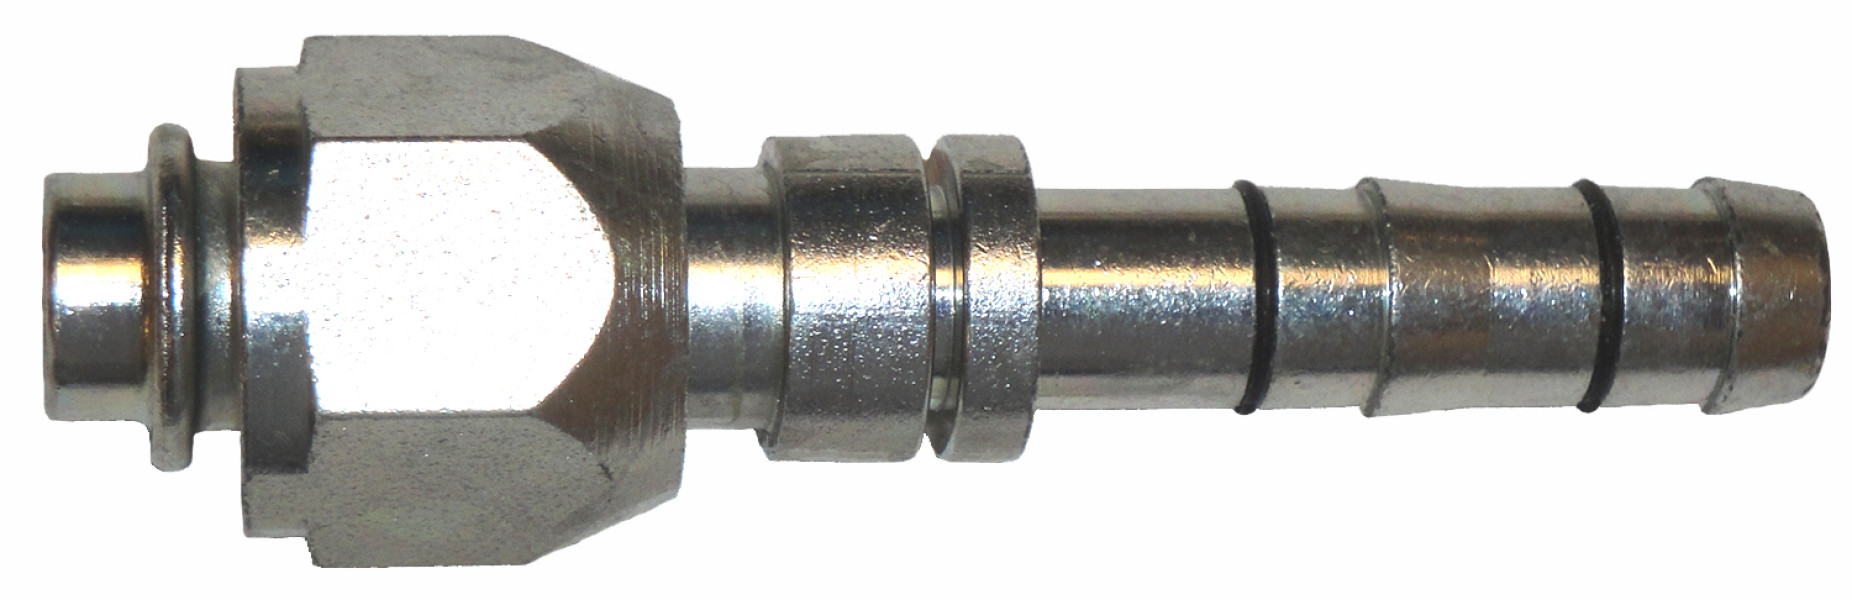 Image of A/C Refrigerant Hose Fitting from Sunair. Part number: FJ5984-0808S